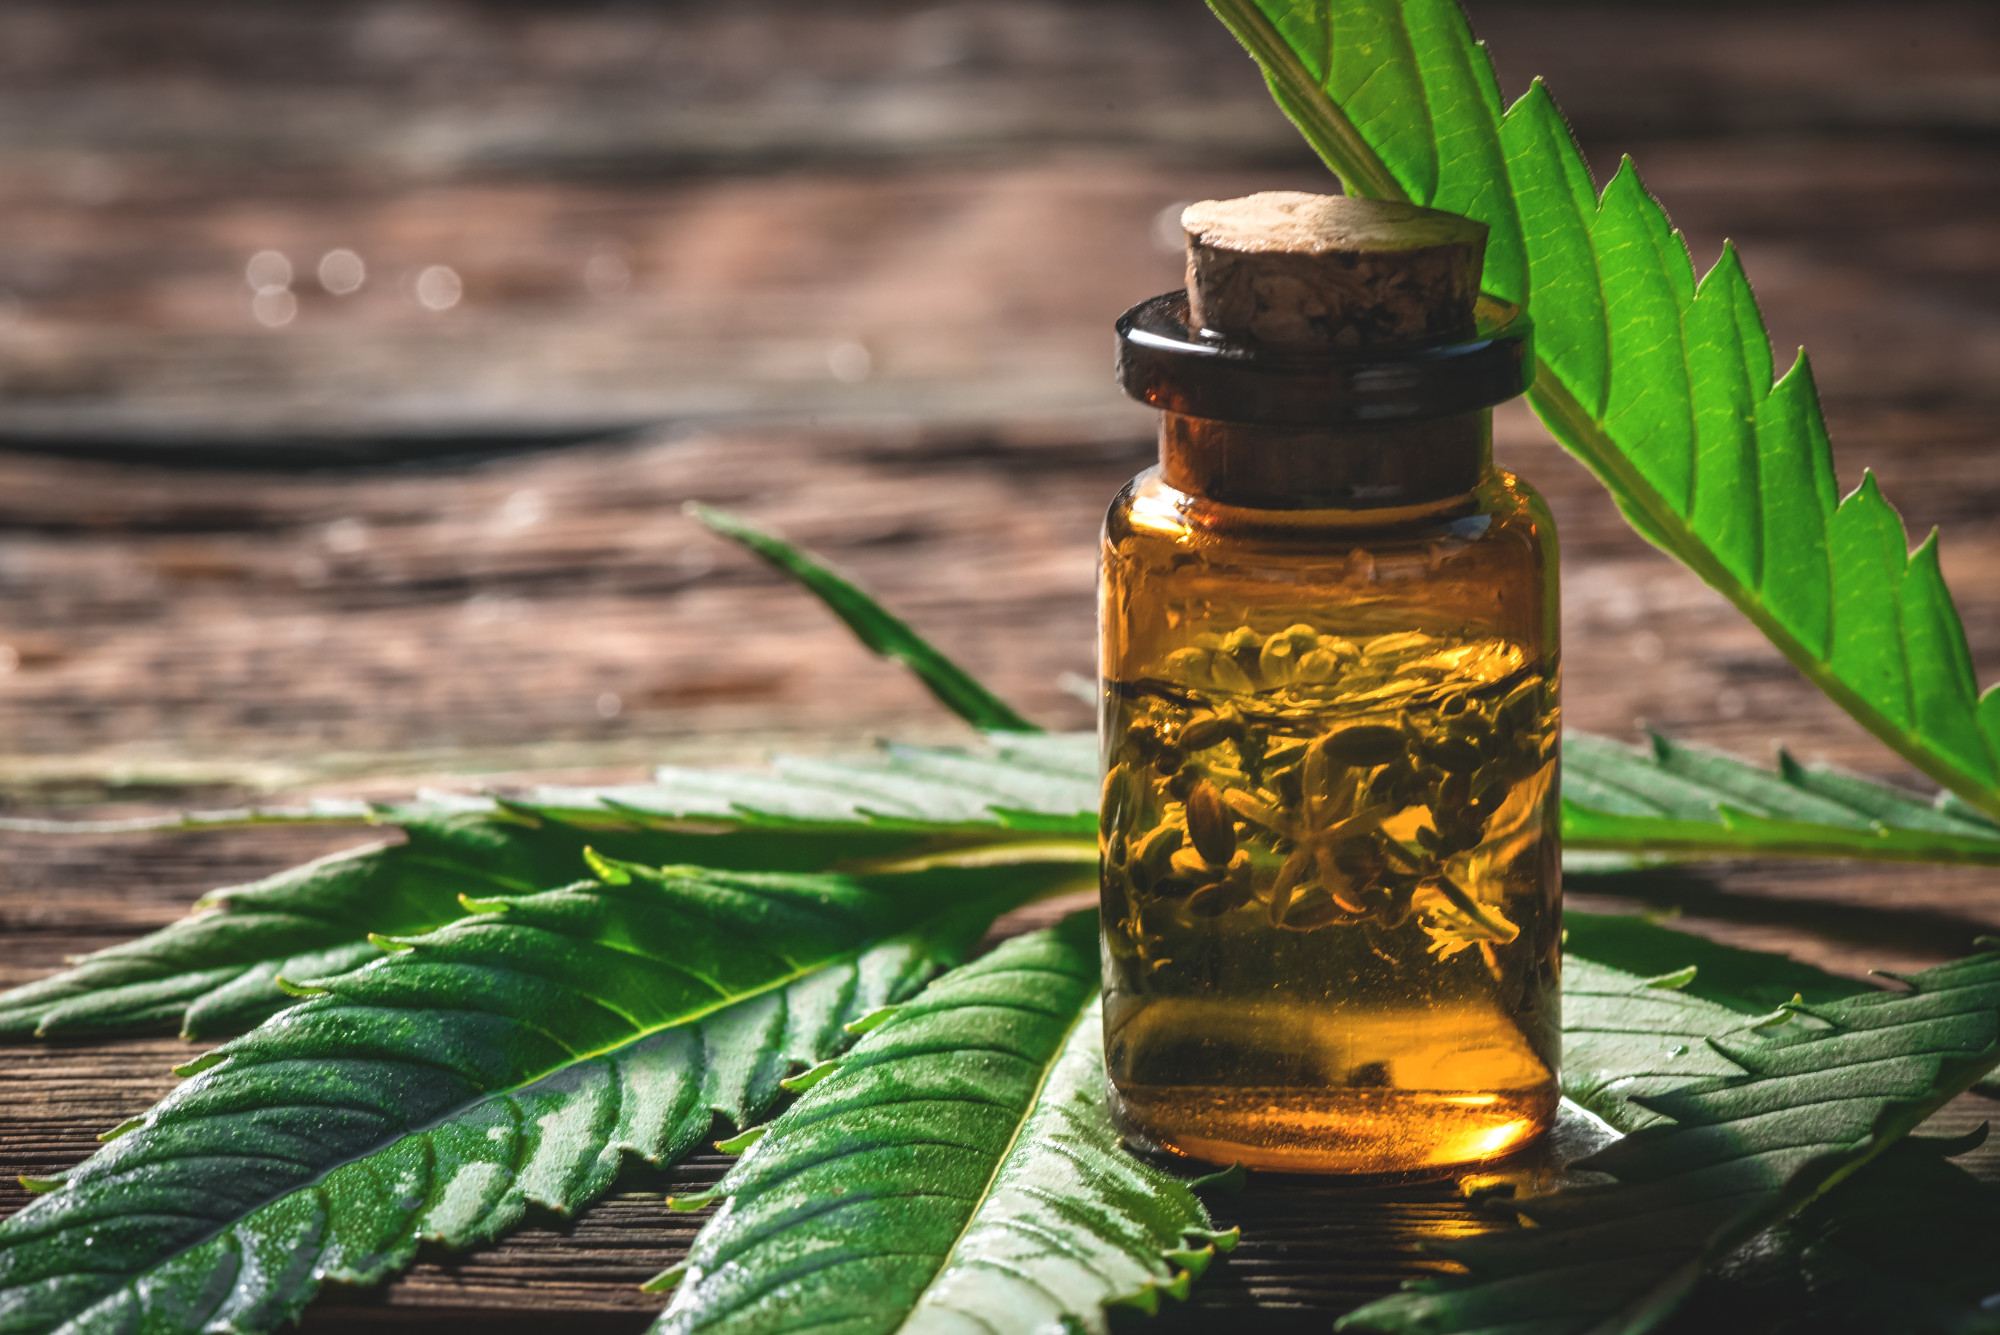 Comparing Cannabinoids: What’s the Difference Between CBD vs CBG vs CBN